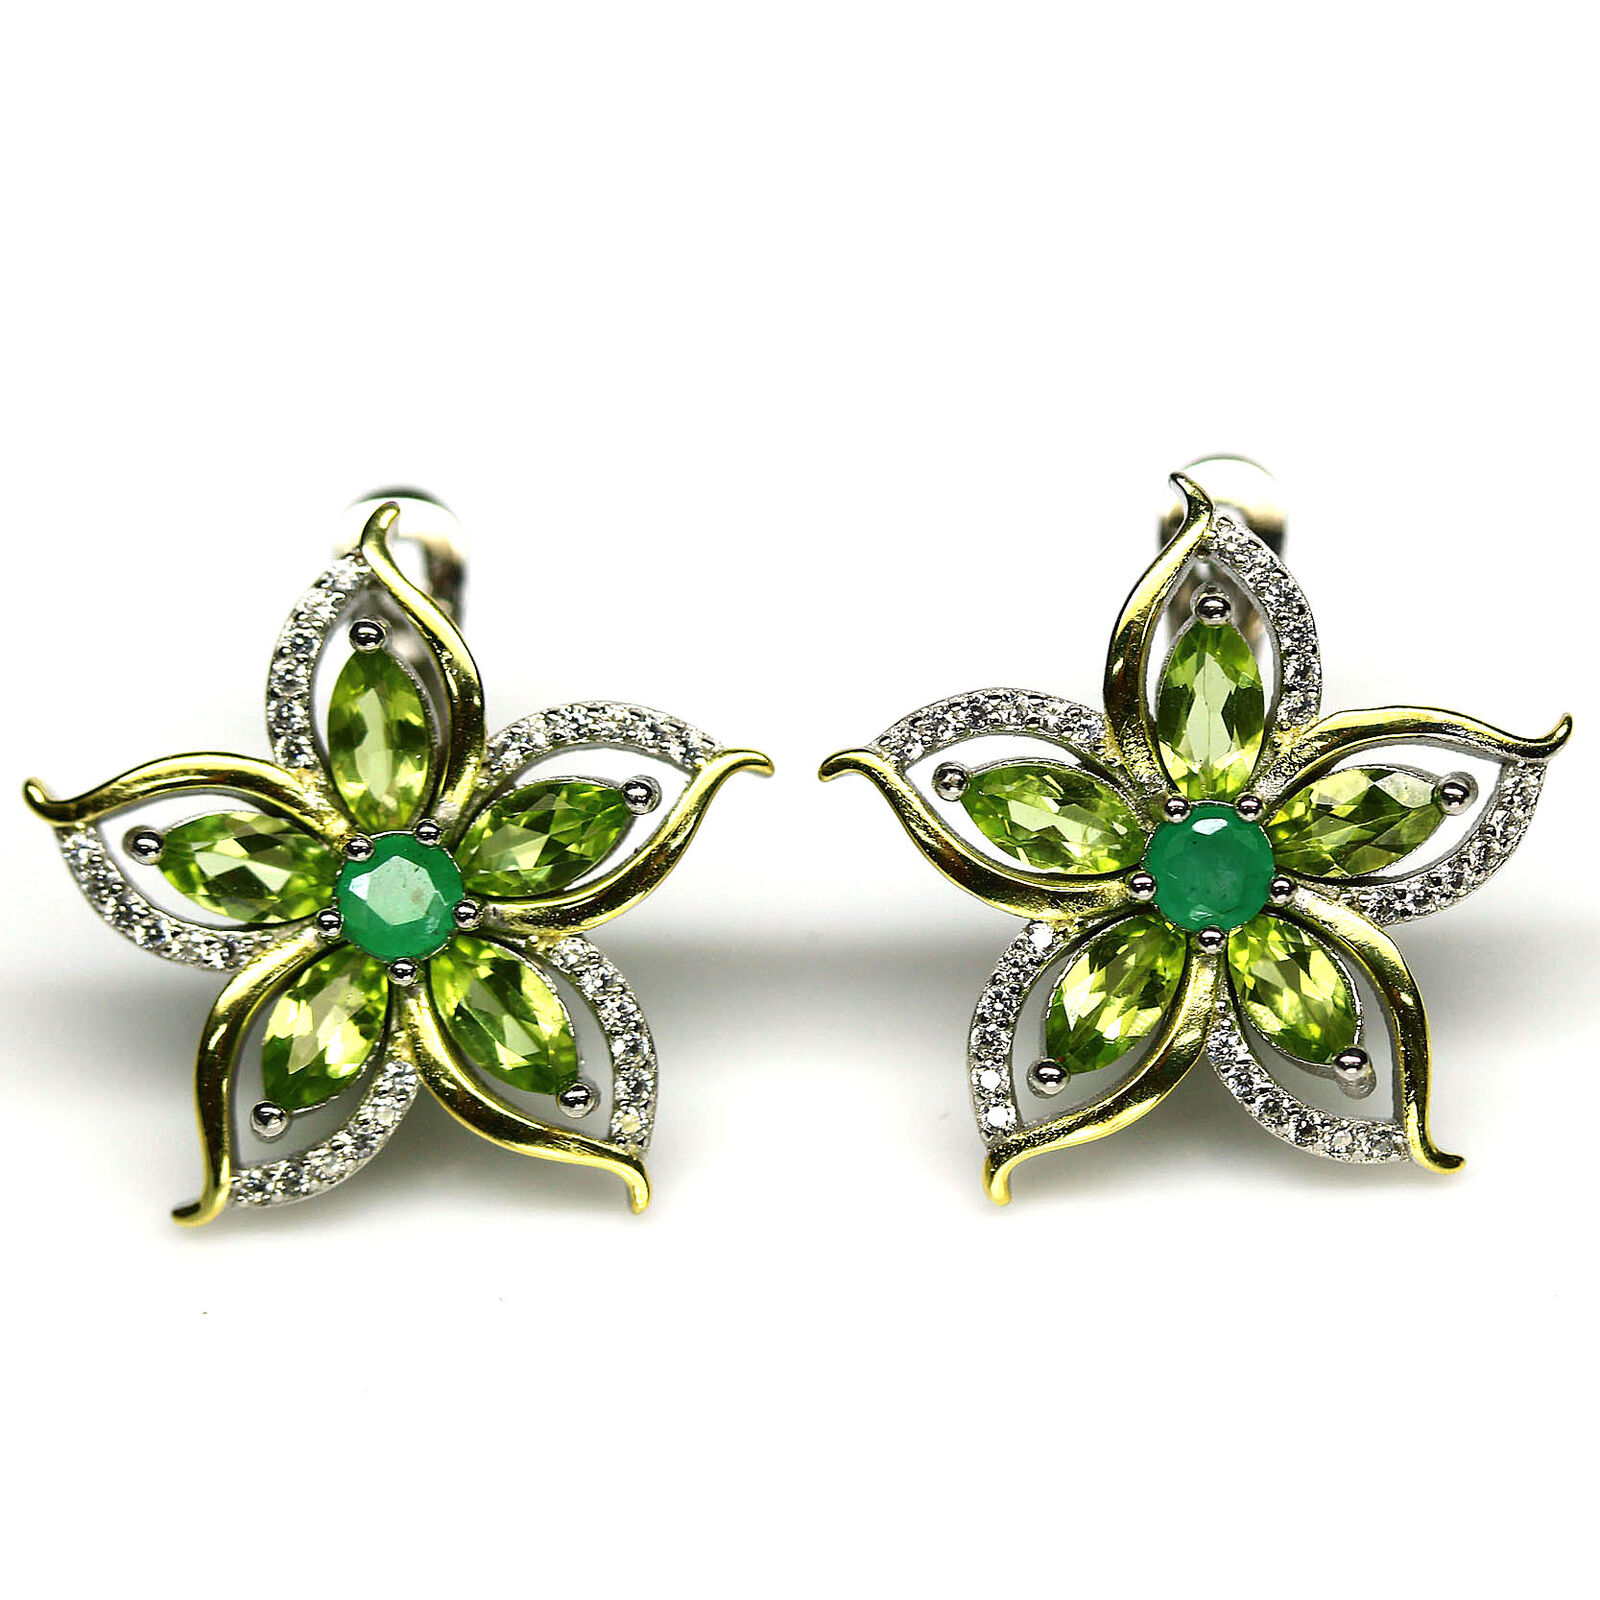 A pair of 925 silver flower shaped earrings set with marquise cut peridots and emeralds, L. 2.3cm.